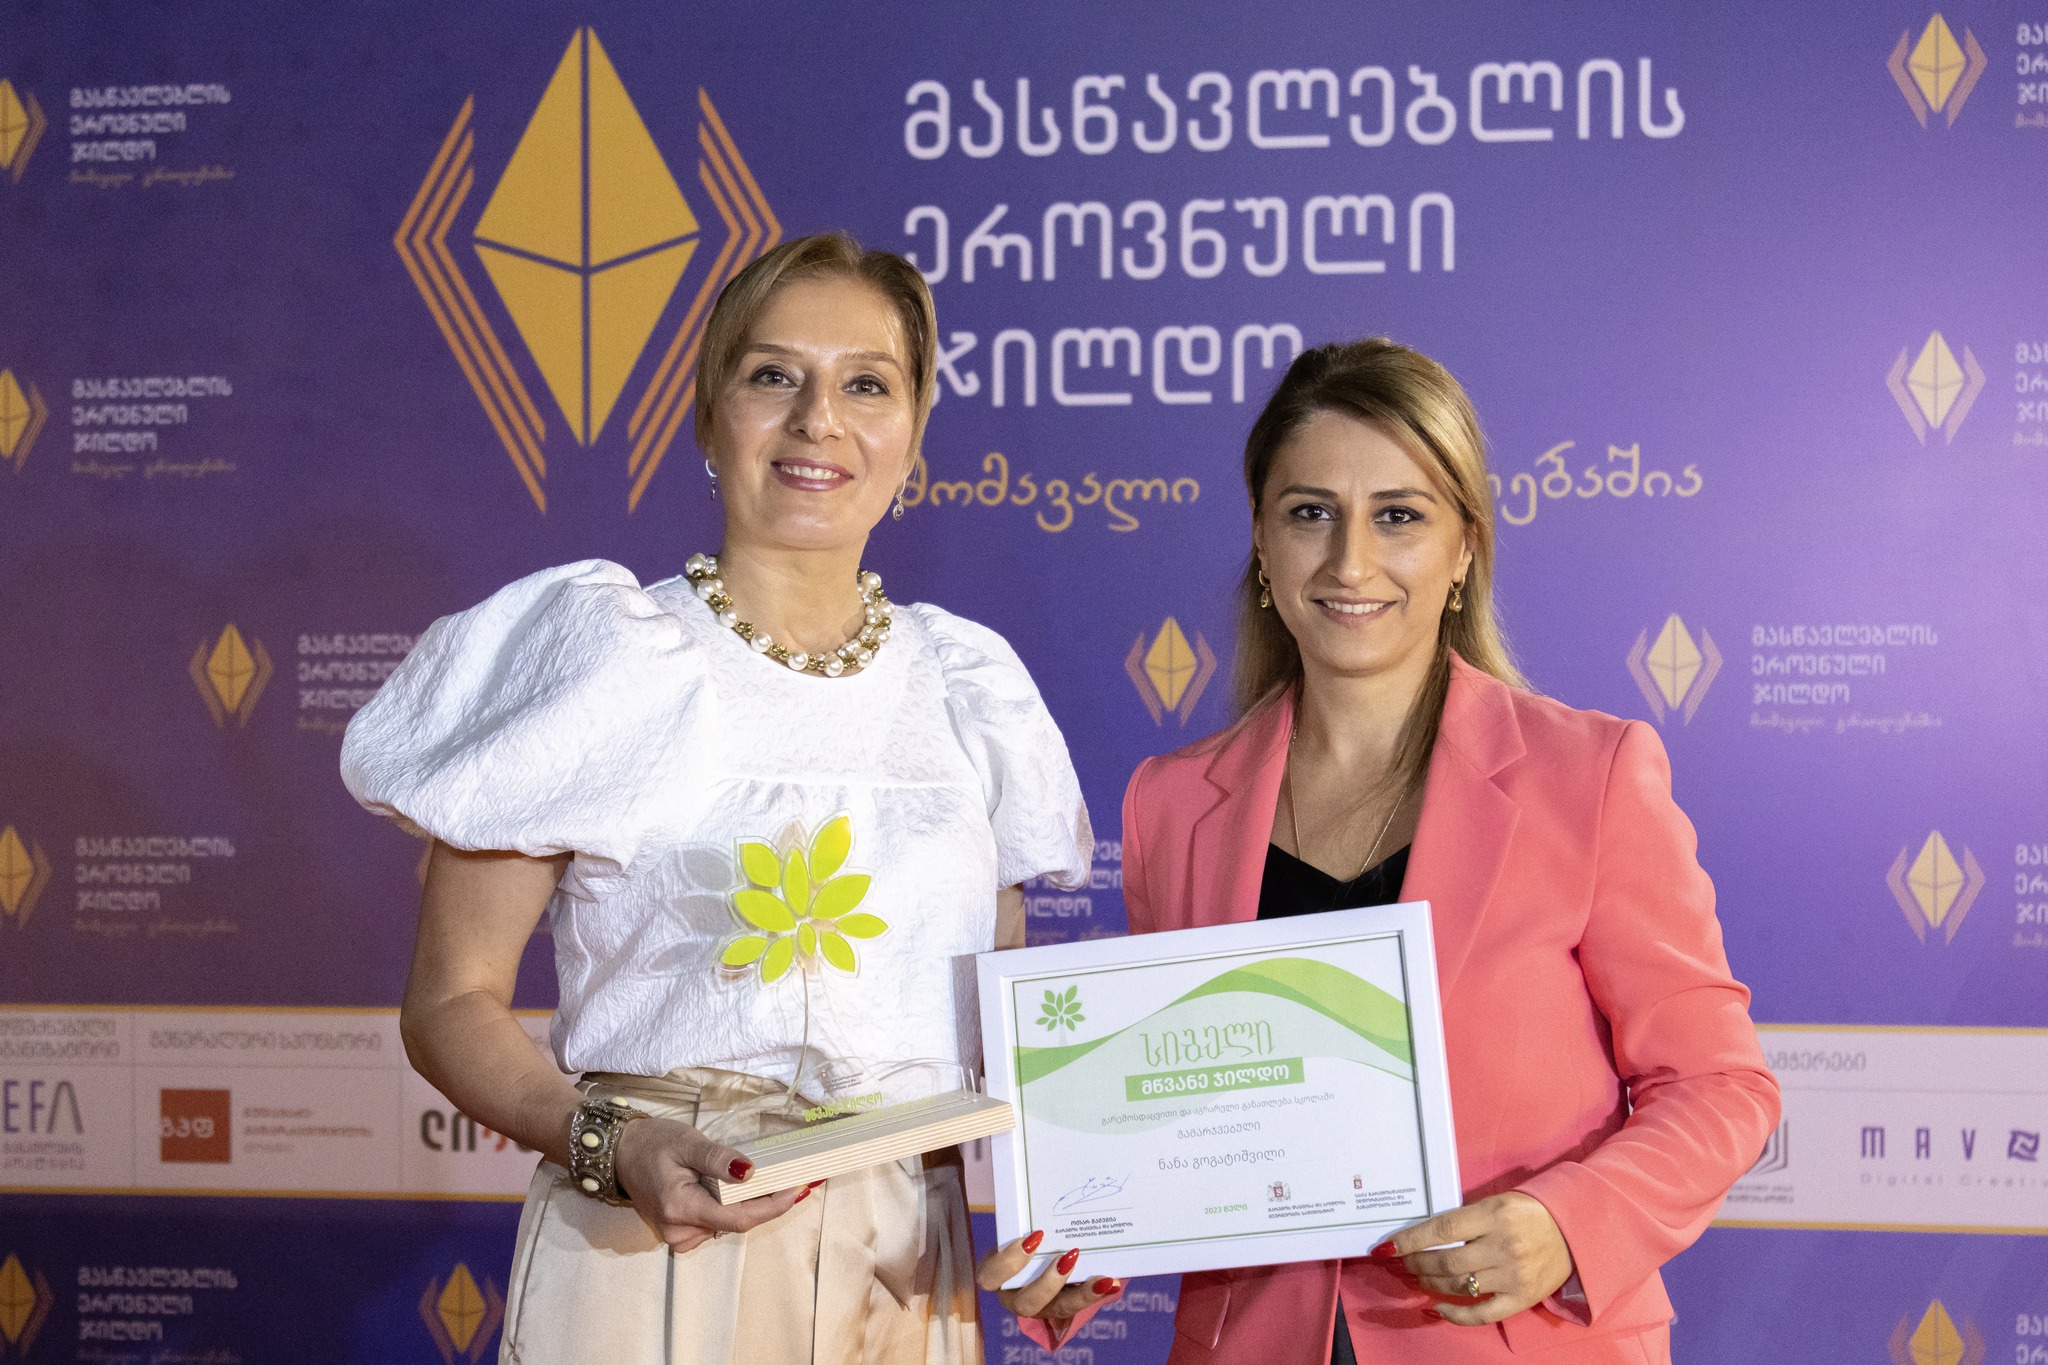 The ''Green Award'' was presented to Nana Gogitashvili, the teacher chosen by the Ministry of  Environmental Protection and Agriculture of Georgia